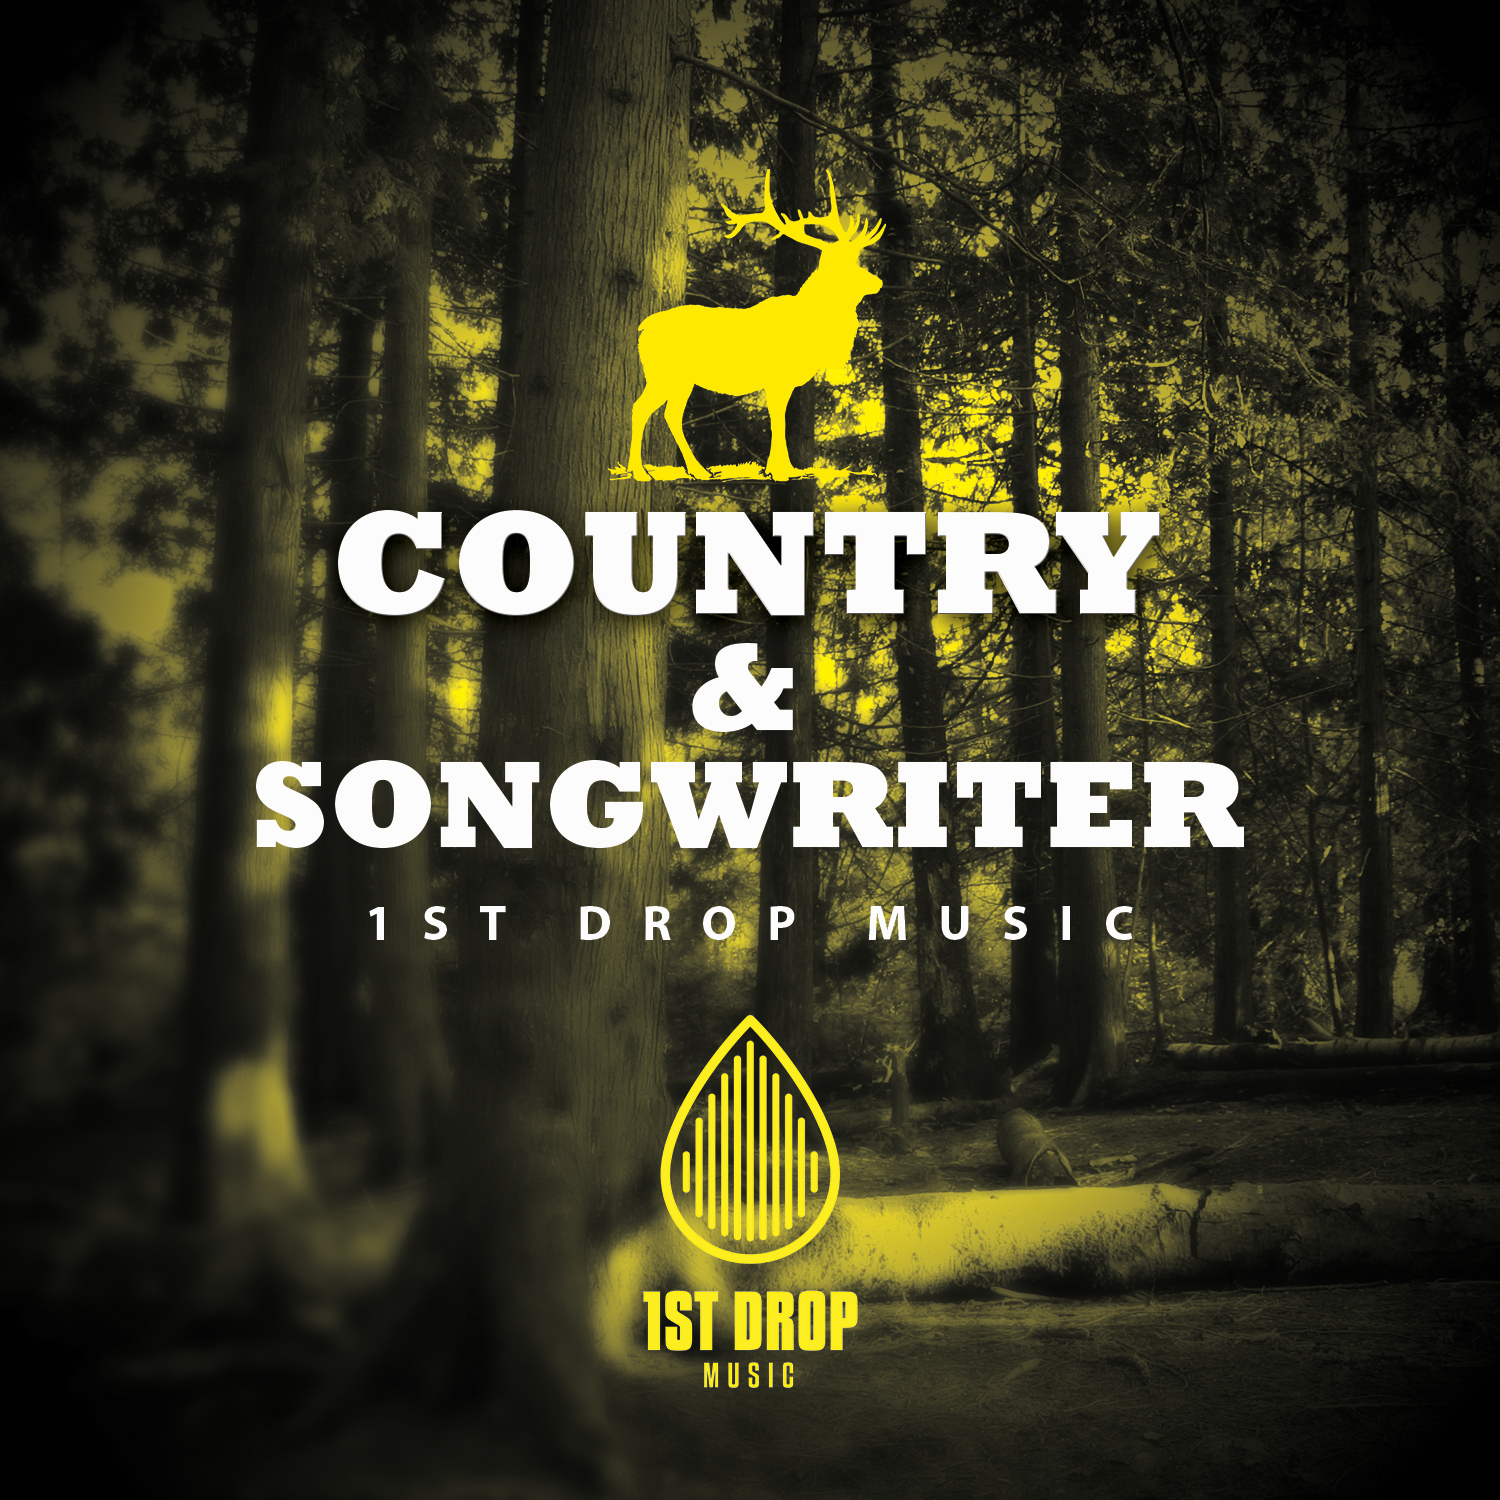 Country-&-Songwriter-Playlist-Cover-(1)